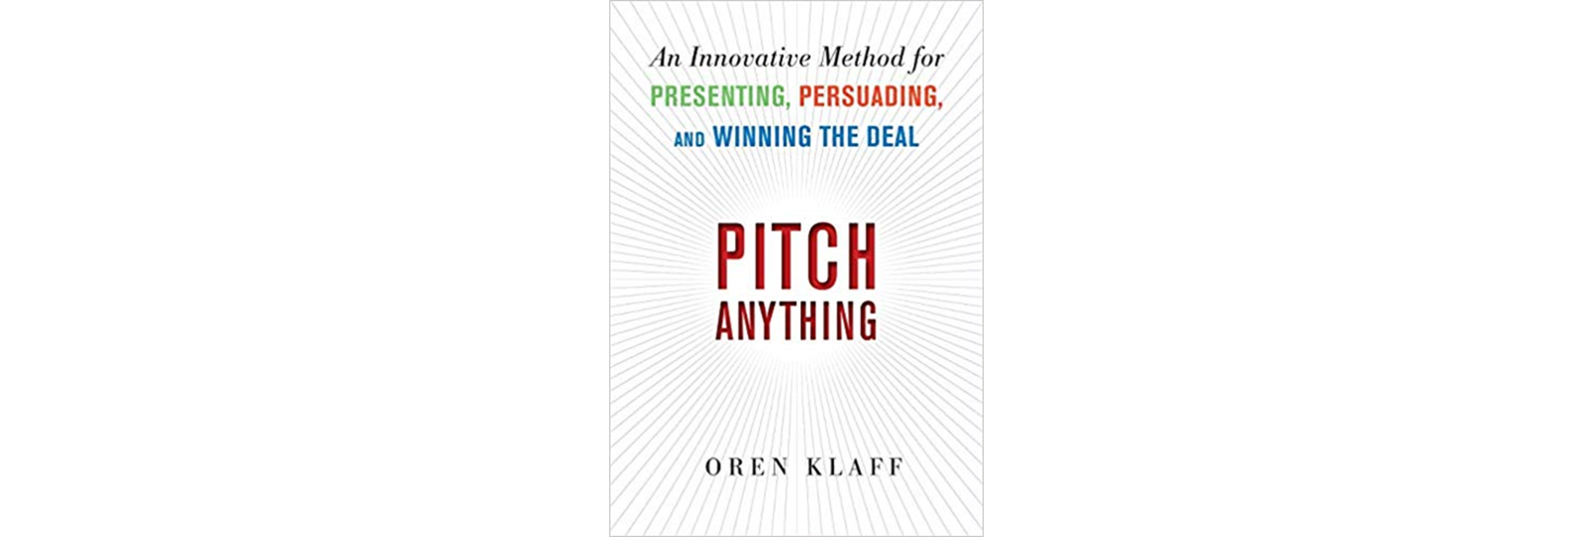 Pitch Anything book cover